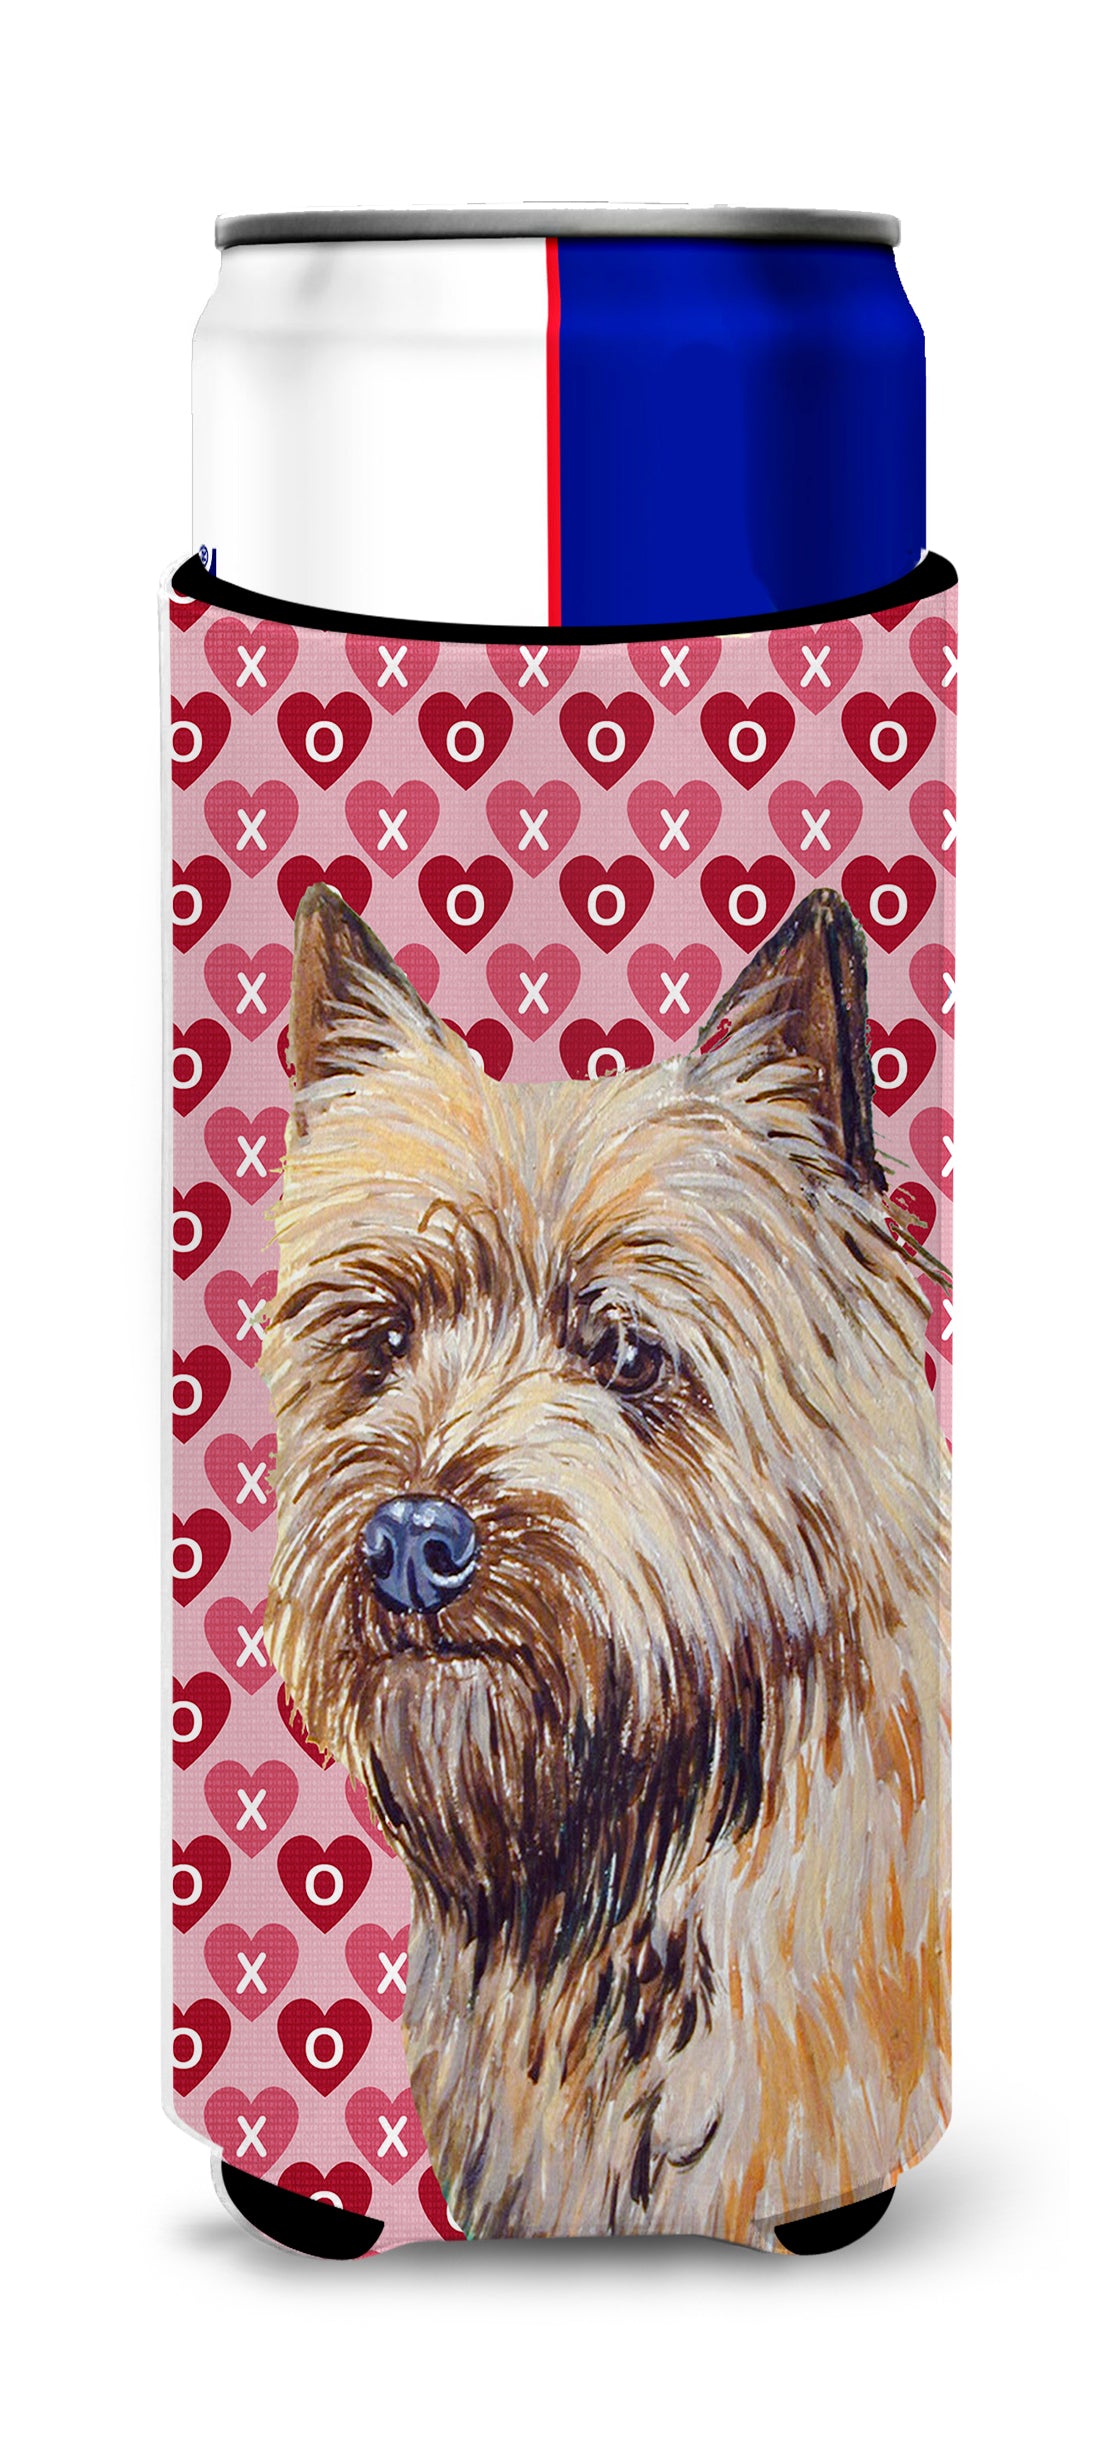 Cairn Terrier Hearts Love and Valentine's Day Portrait Ultra Beverage Insulators for slim cans LH9140MUK.